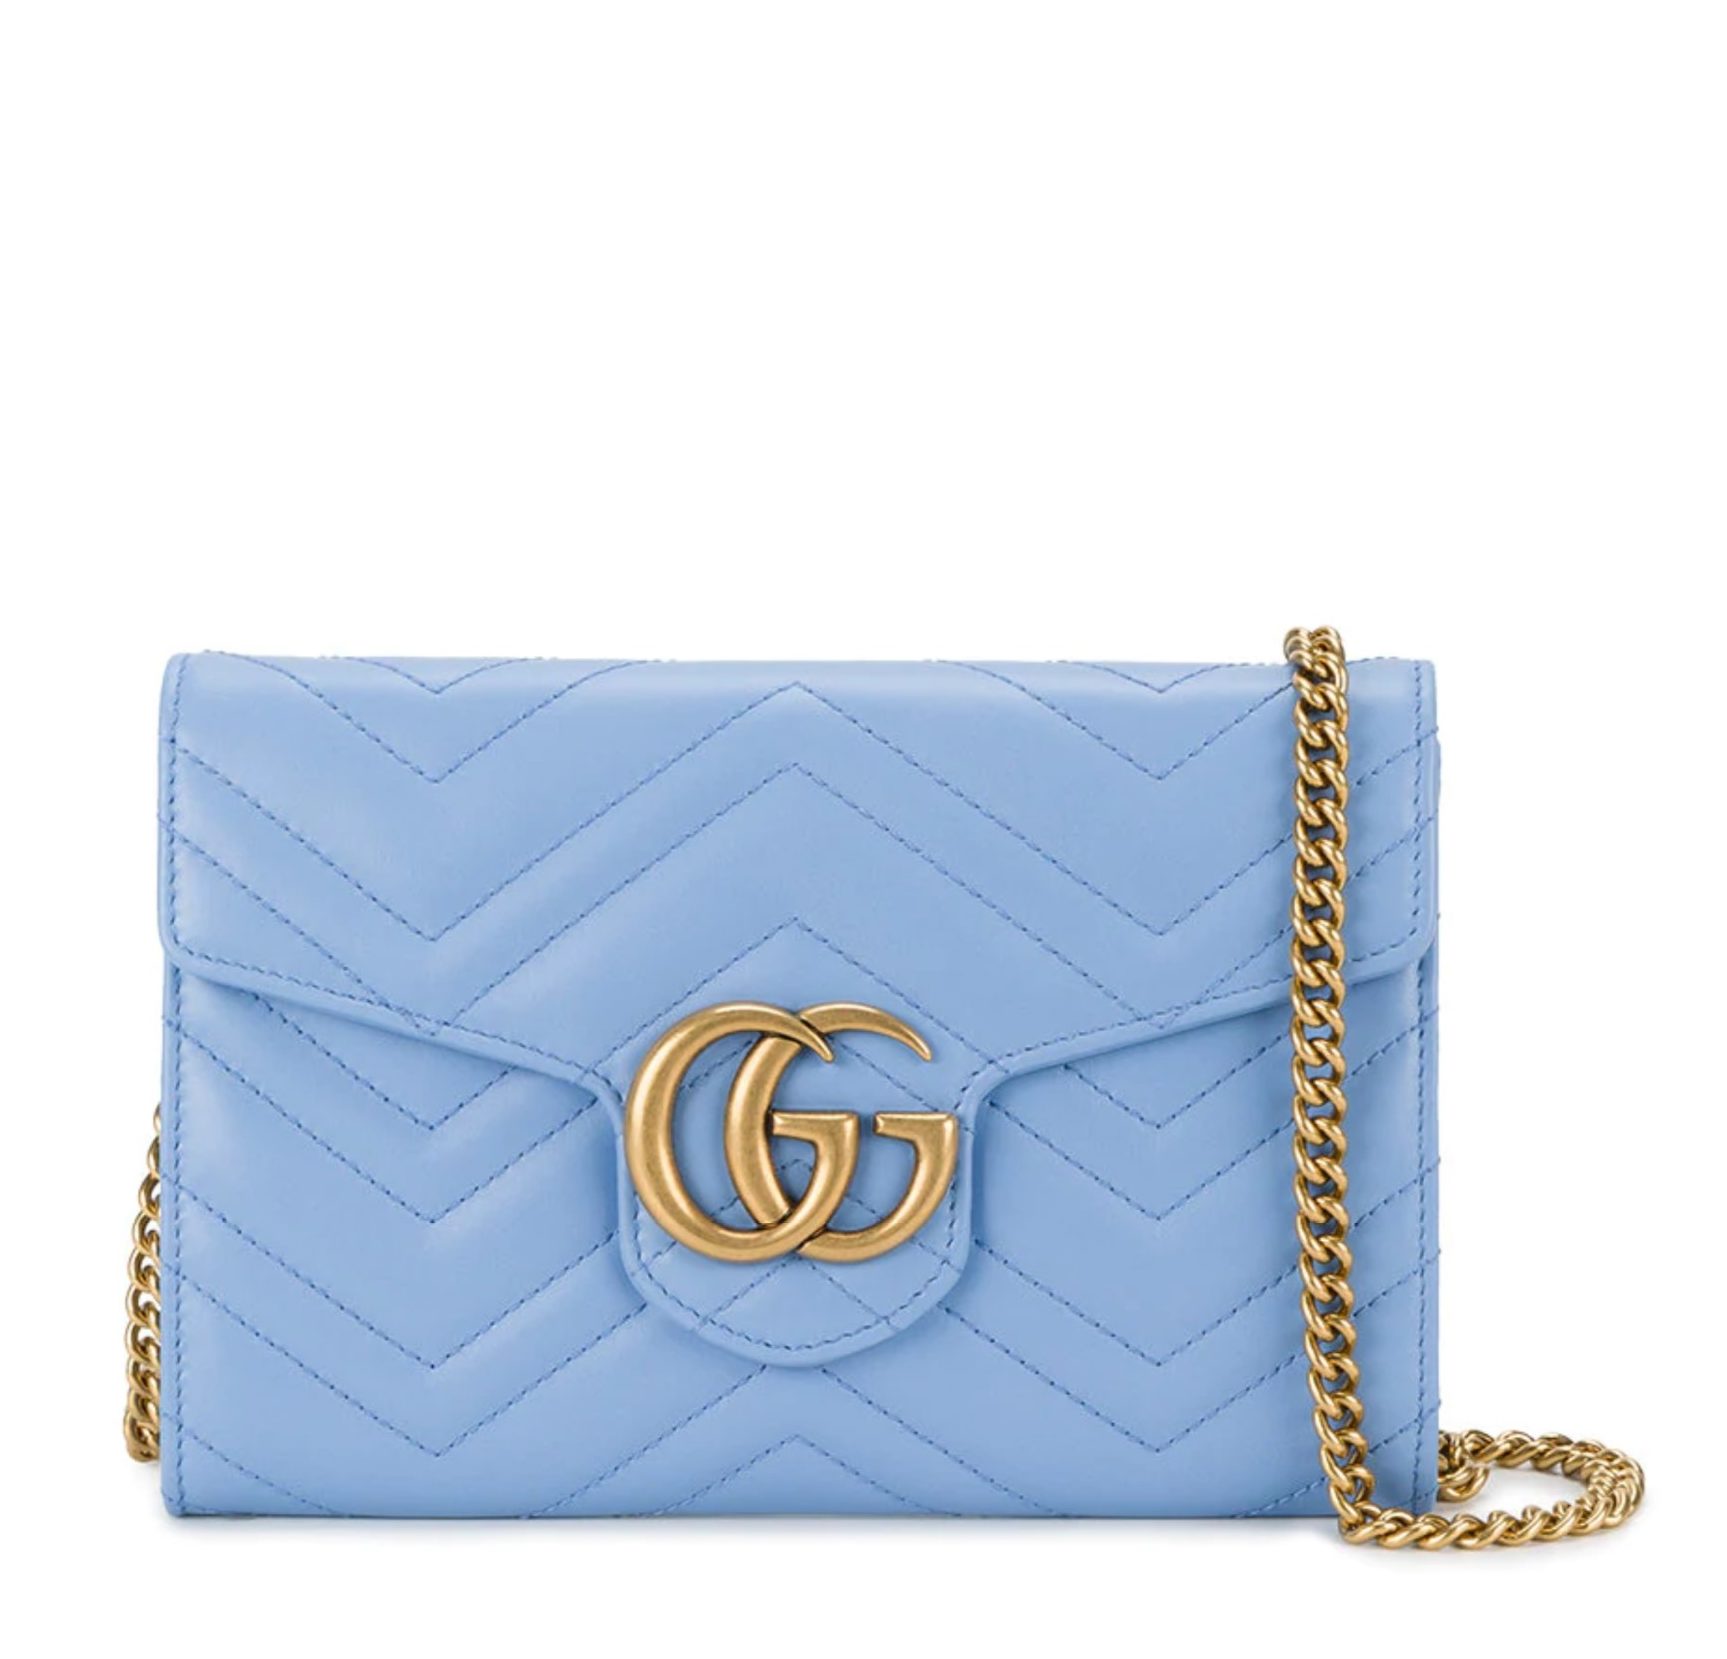 GUCCI Marmont Wallet Chain Bag - Sky Blue - Adorn Collection